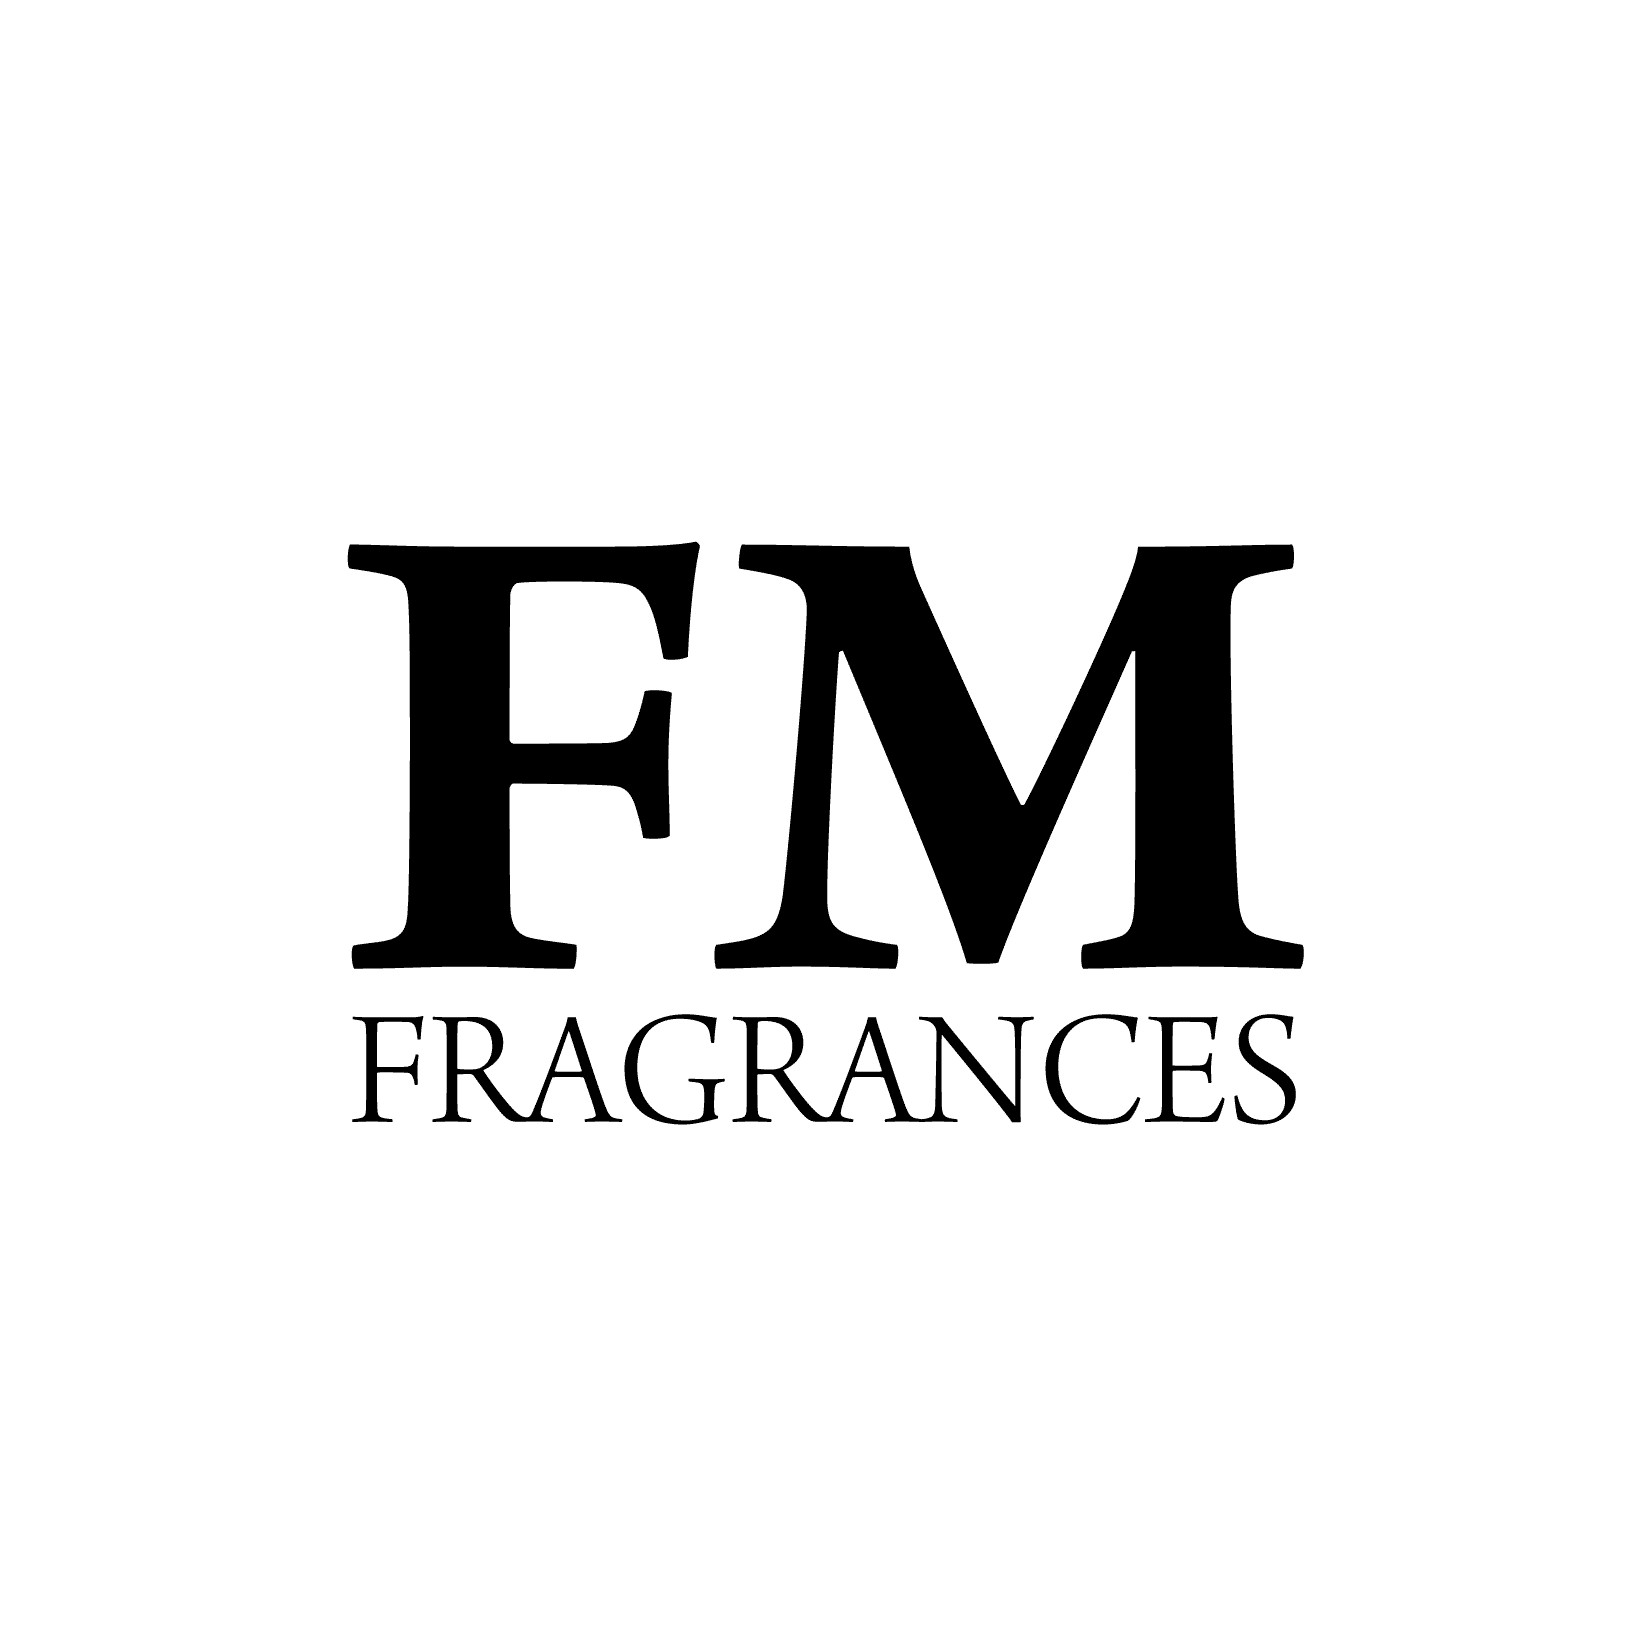 Save Up To 30% on All FM Fragrances